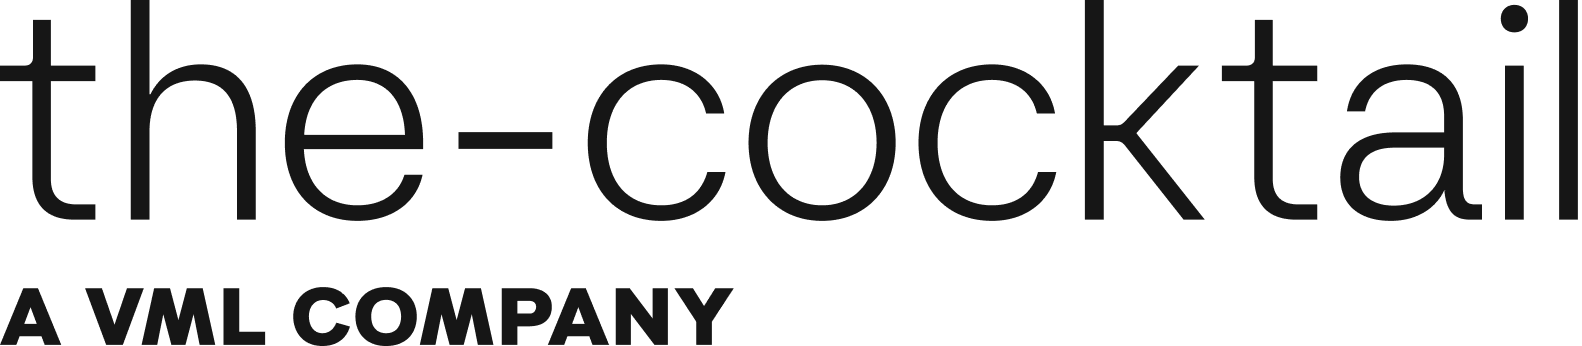 The Cocktail logo